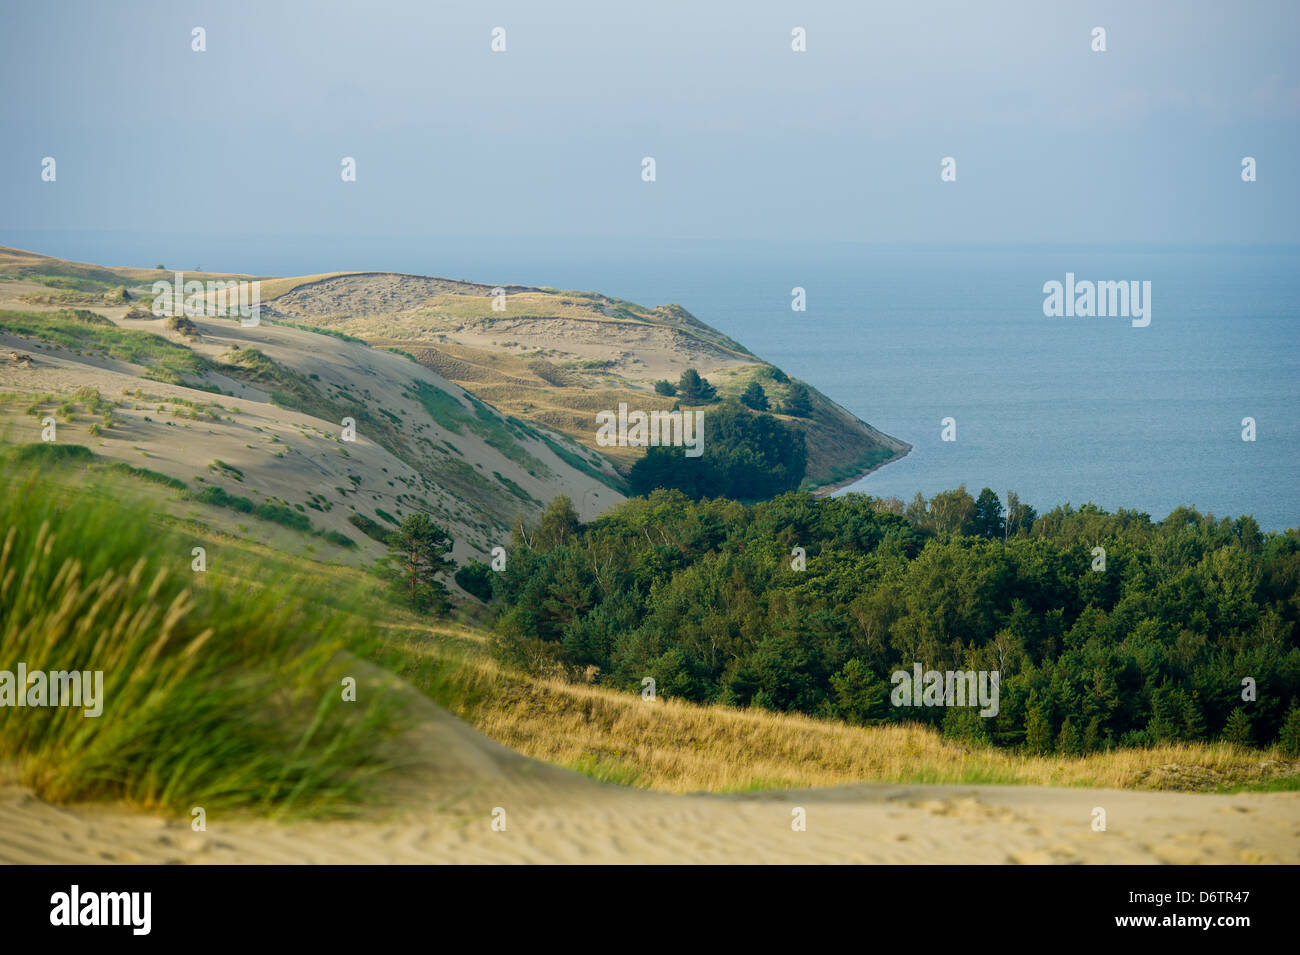 View of Dead Dunes, Curonian Spit and Curonian Lagoon, Nagliai, Nida, Klaipeda, Lithuania. Stock Photo